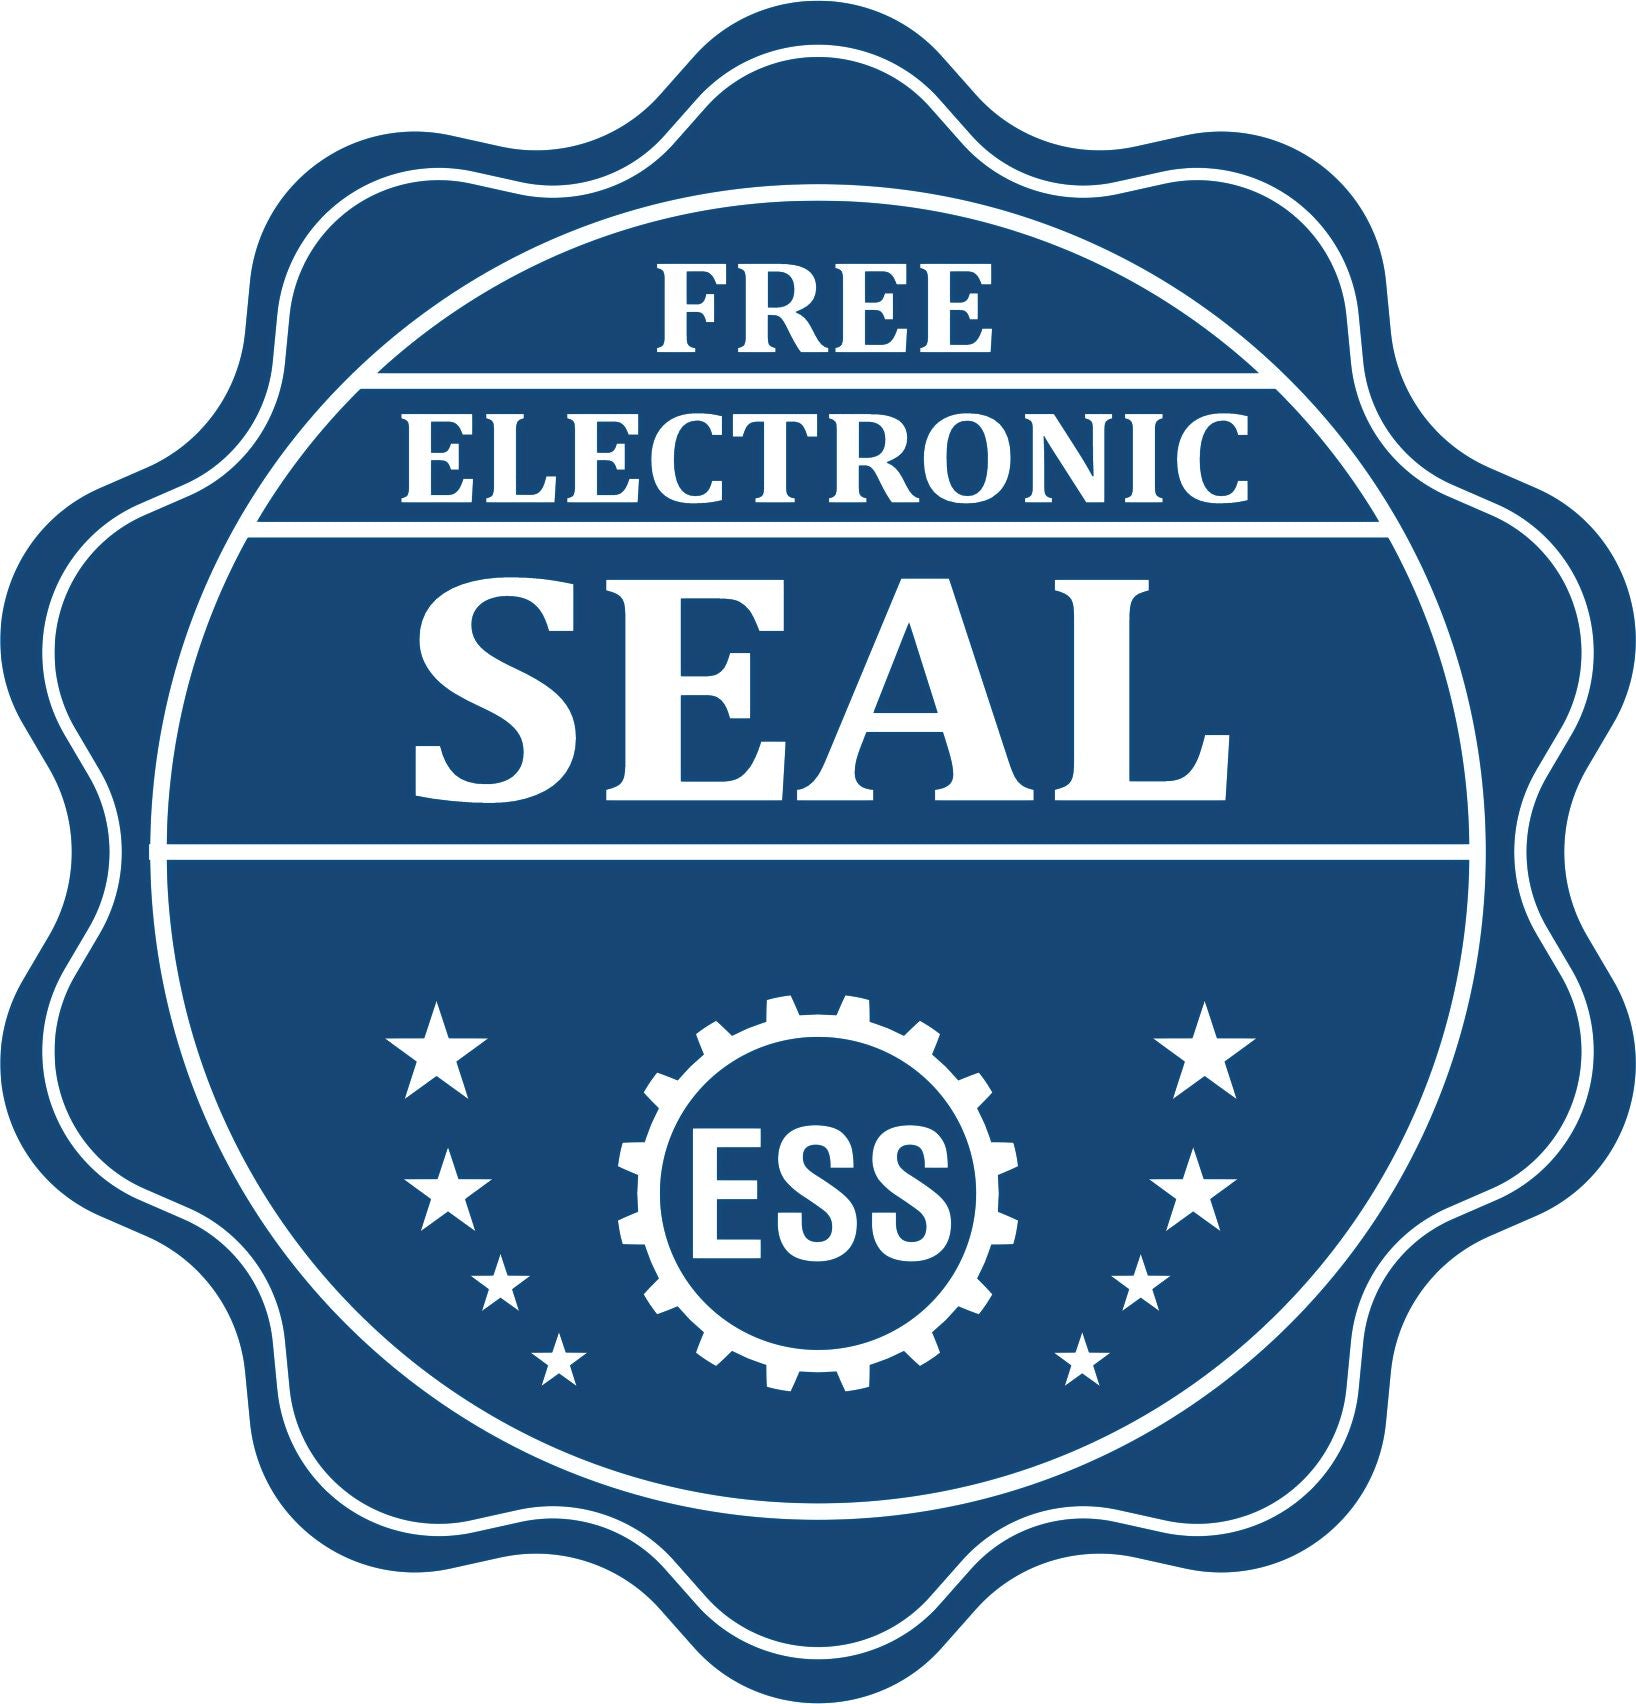 A badge showing a free electronic seal for the MaxLight Premium Pre-Inked Indiana Rectangular Notarial Stamp with stars and the ESS gear on the emblem.